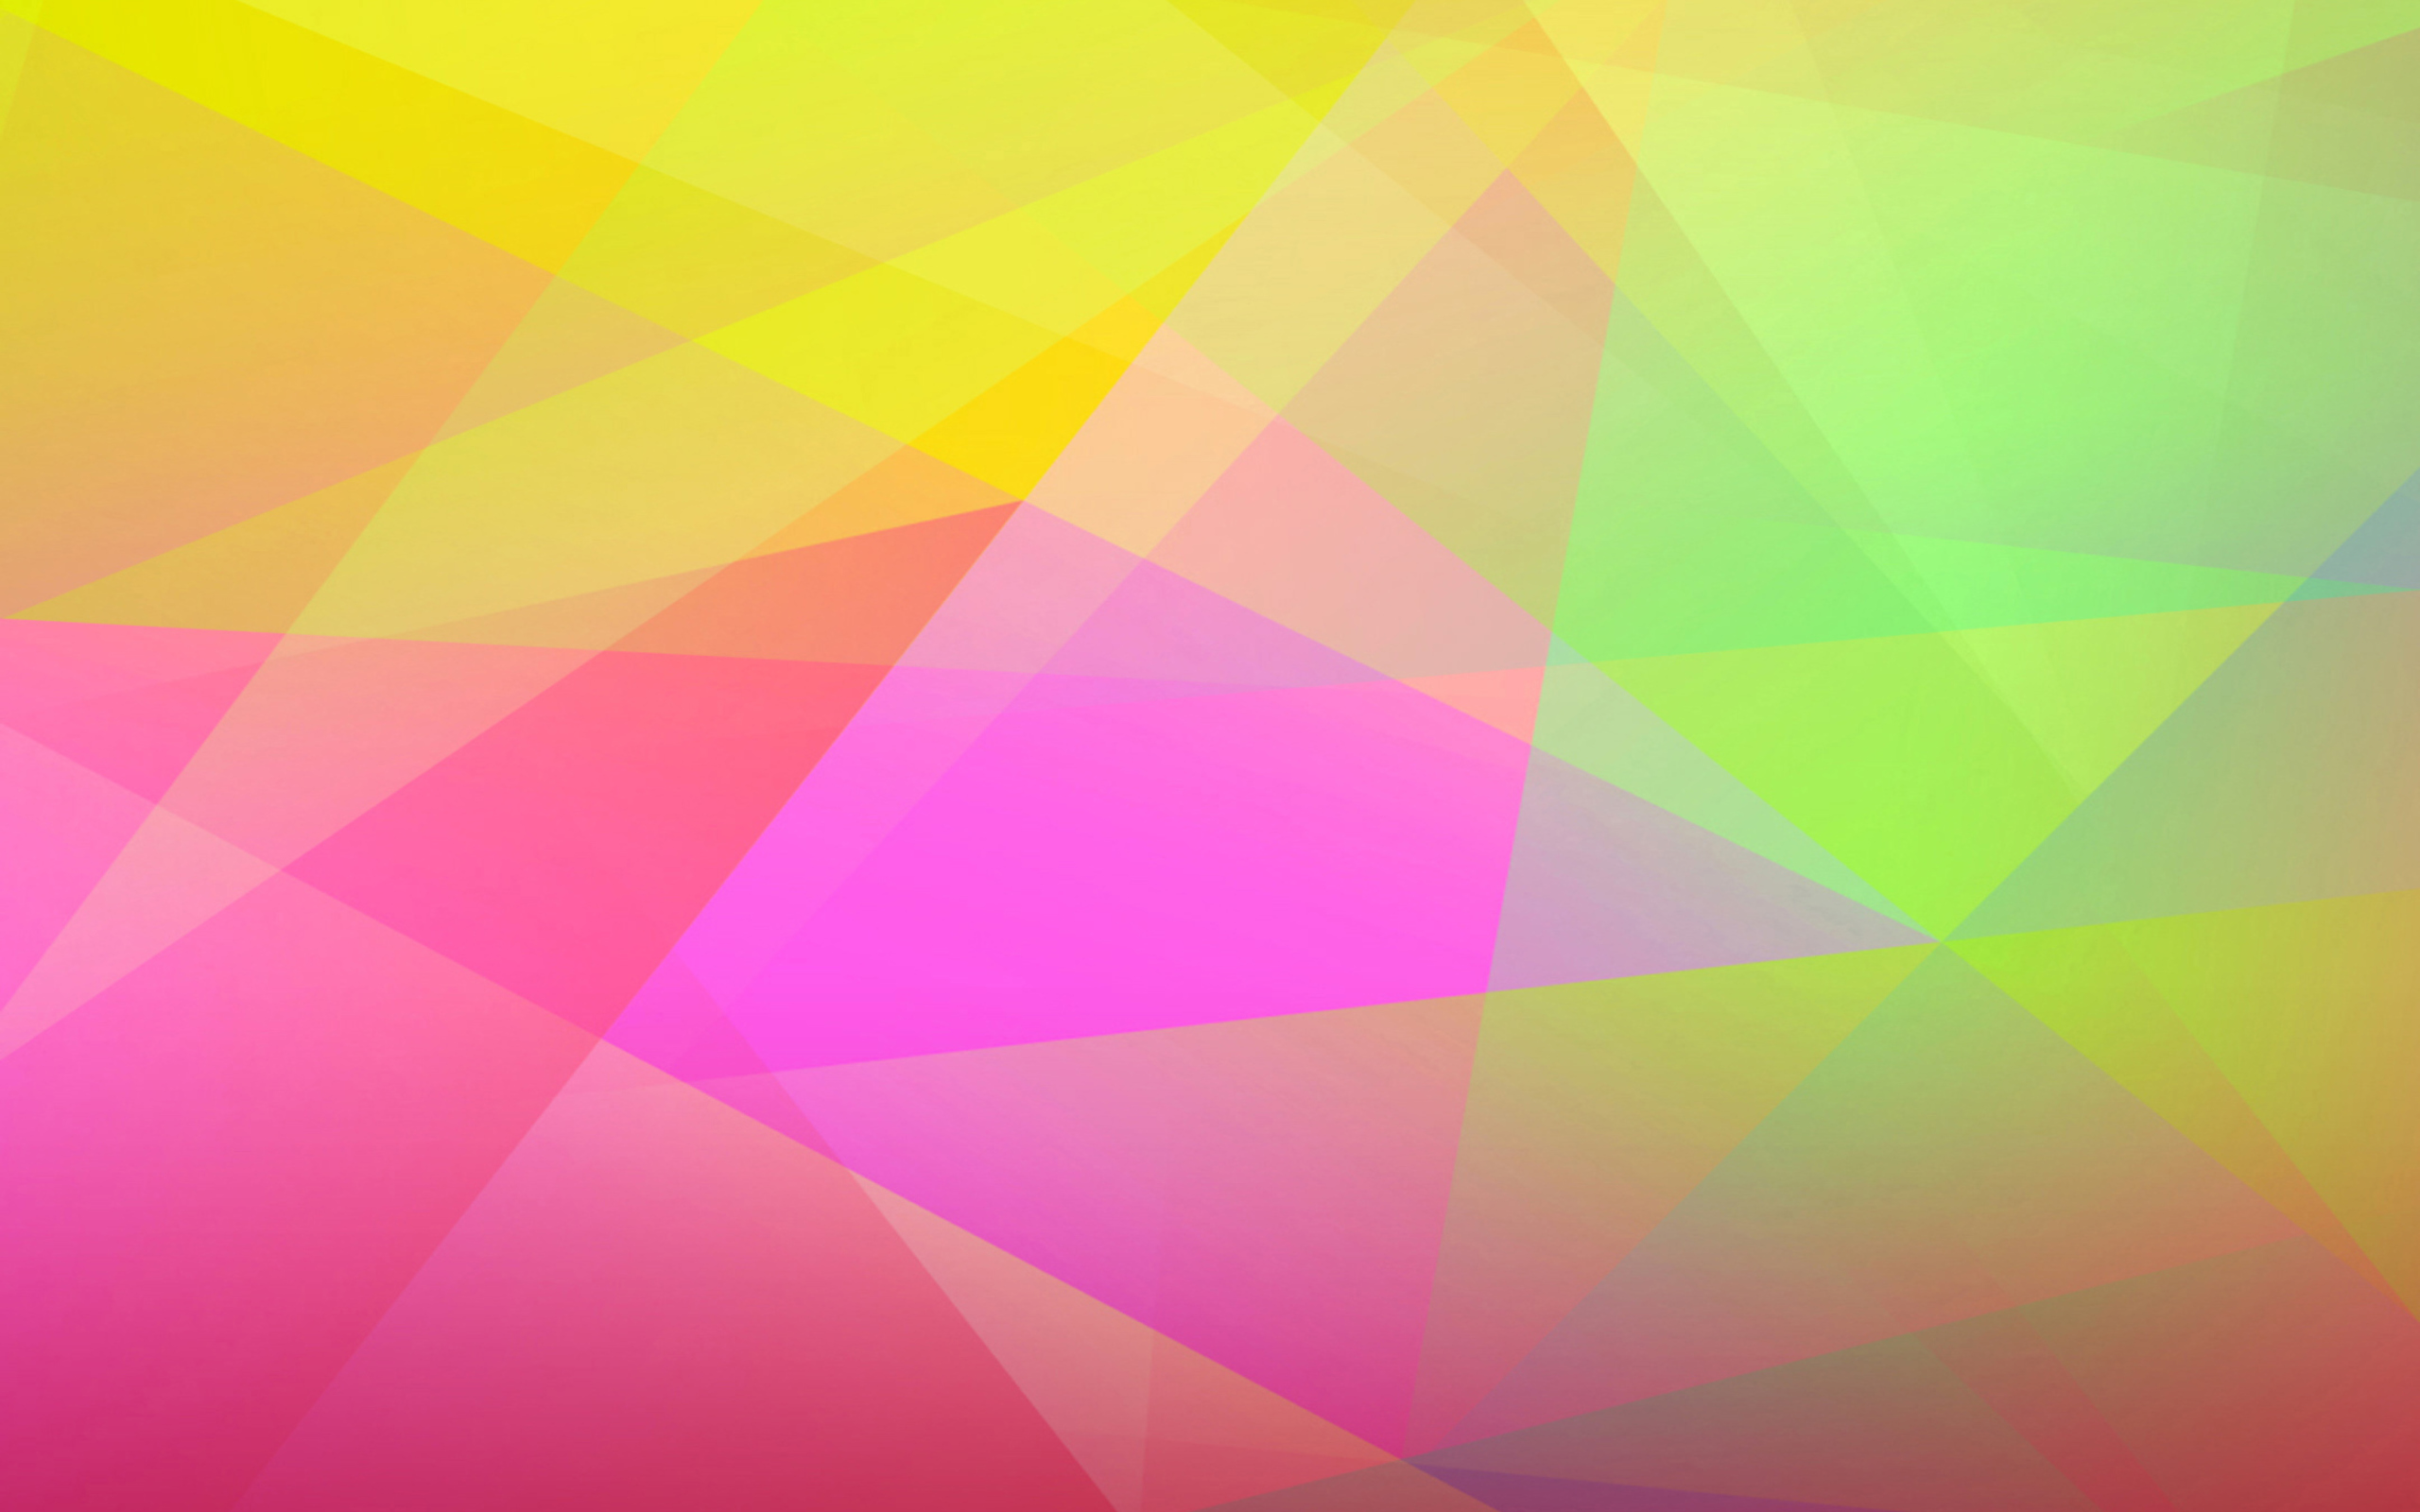 Das Glowing Abstract Wallpaper 2560x1600